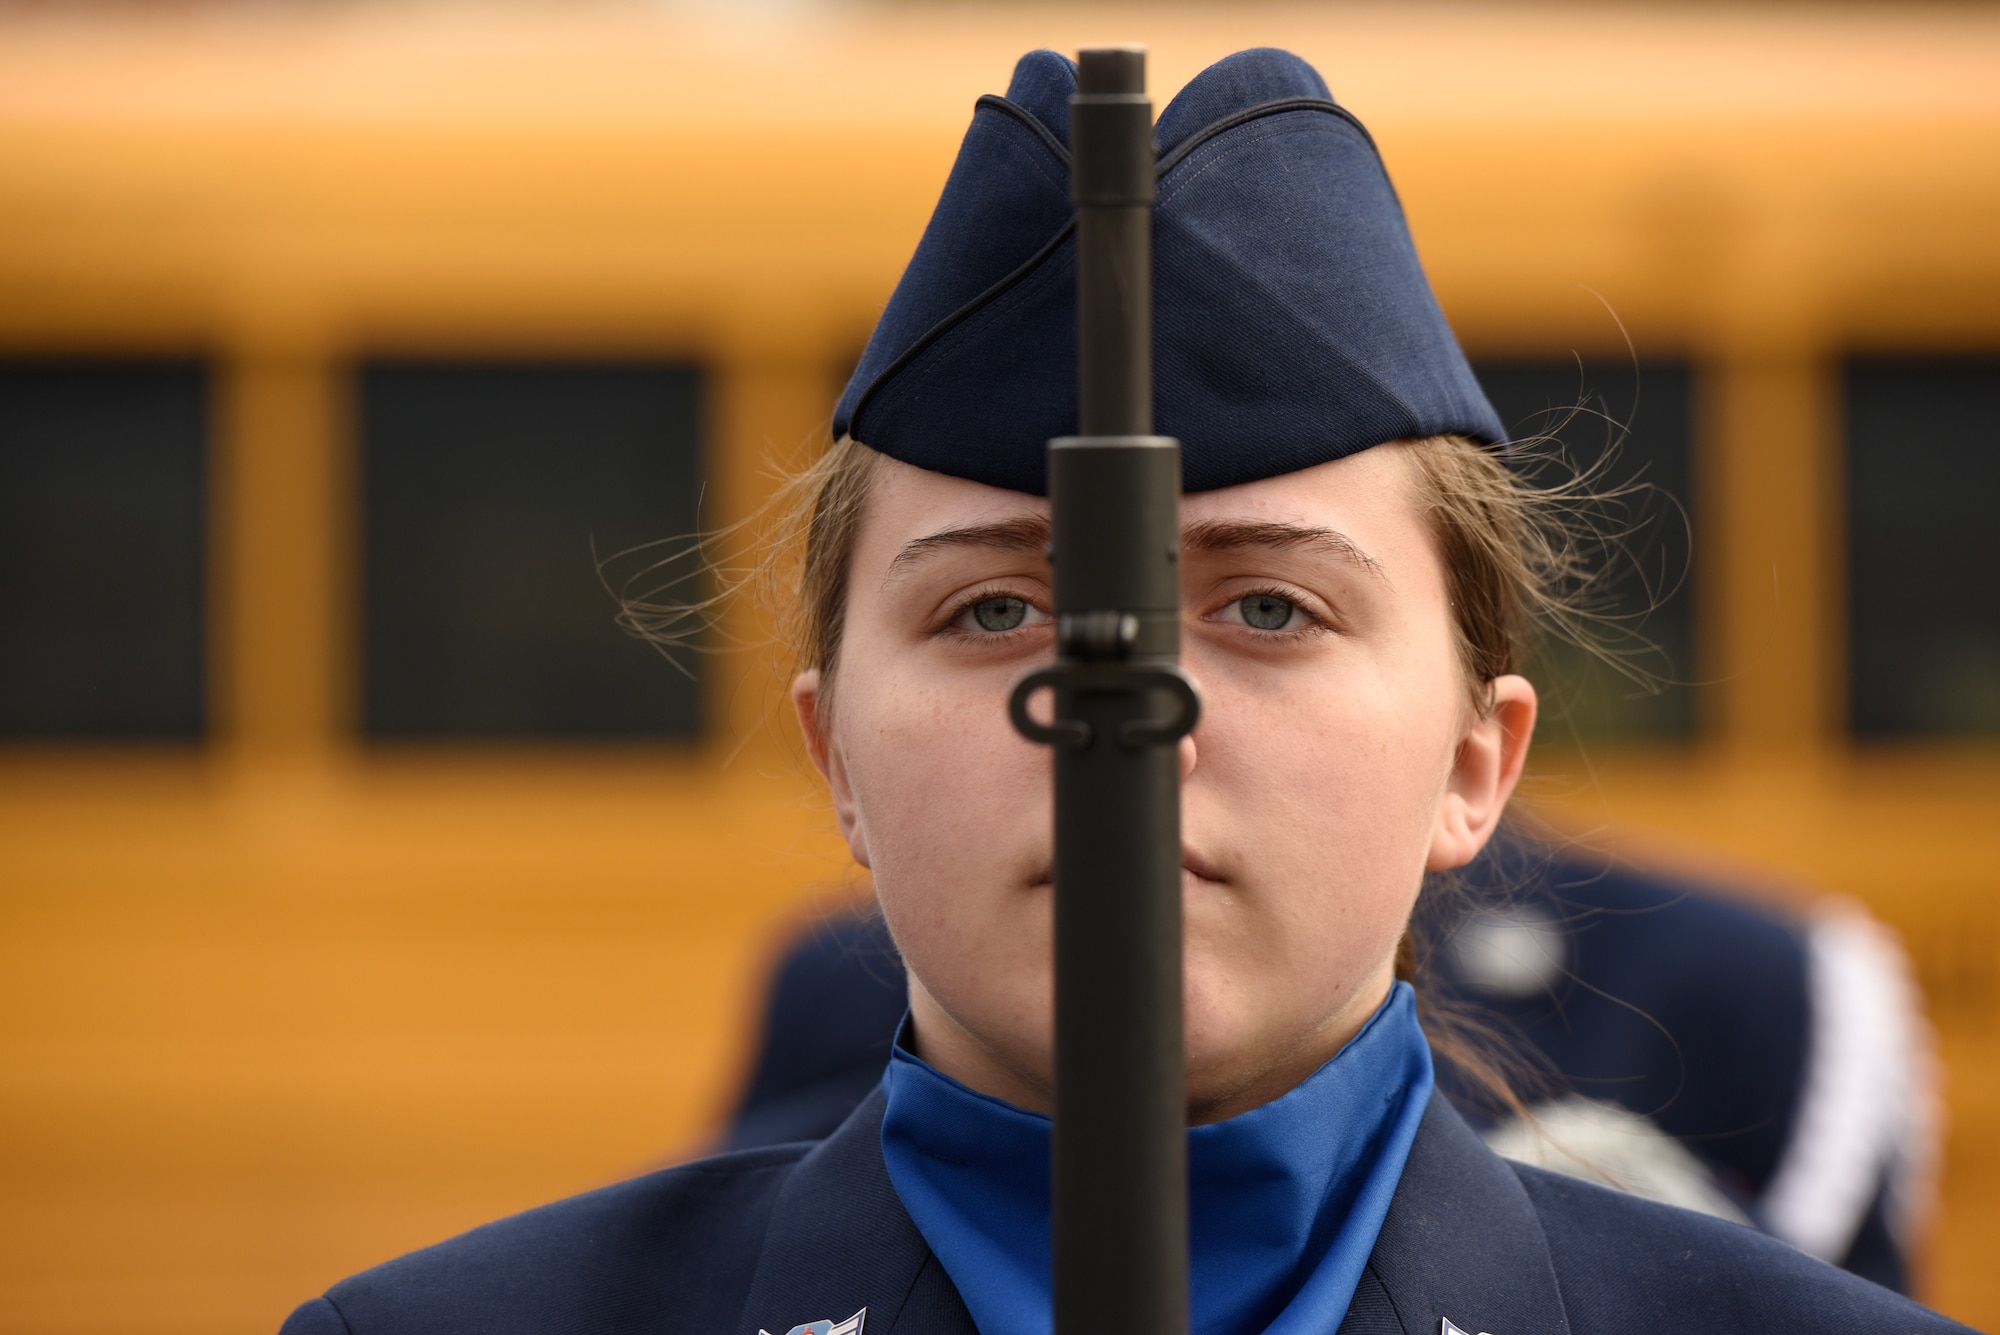 Avery Batts, a Parkwood High School Air Force Junior Reserve Officers' Training Corps cadet, stands at present arms in the armed flight drill during the Patriot Classic Drill Competition held at Independence High School, Charlotte, N.C., March 10, 2018. Over 300 students from 14 high schools traveled from as far as 3 hours away to compete and were judged by volunteers from the North Carolina Air National Guard and Army National Guard.